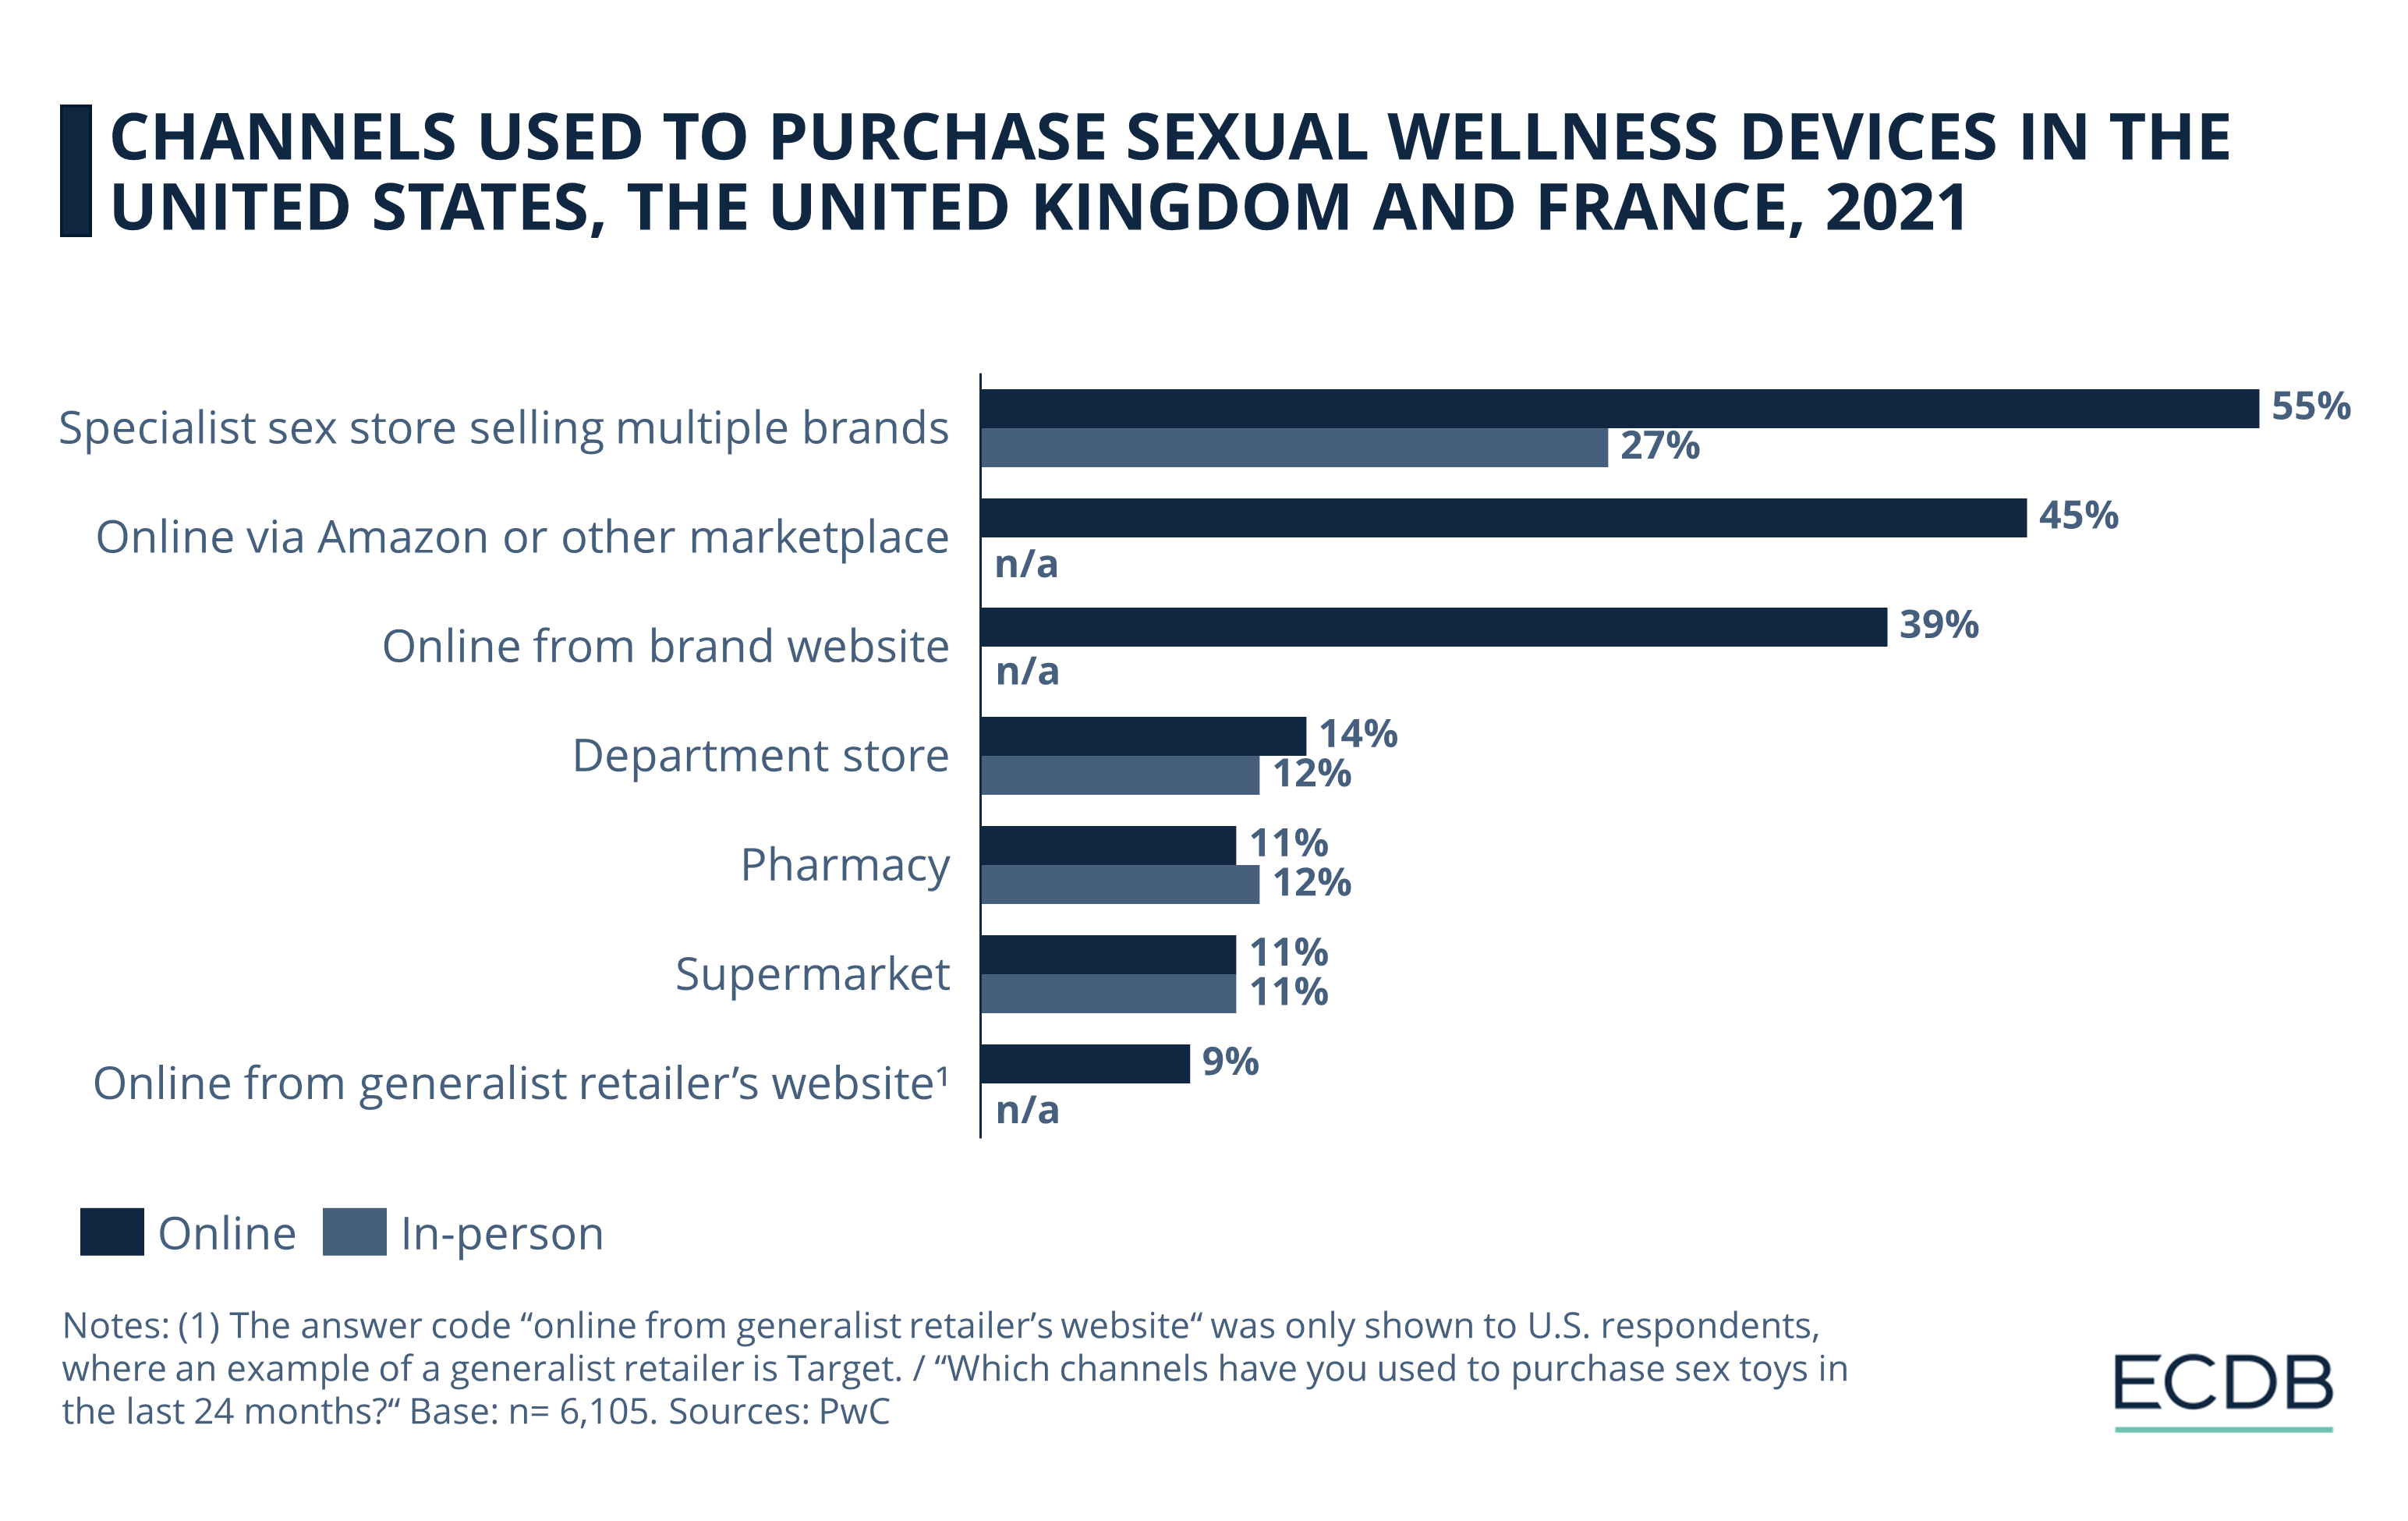 Channels Used to Purchase Sexual Wellness Devices in the United States, the United Kingdom and France, 2021